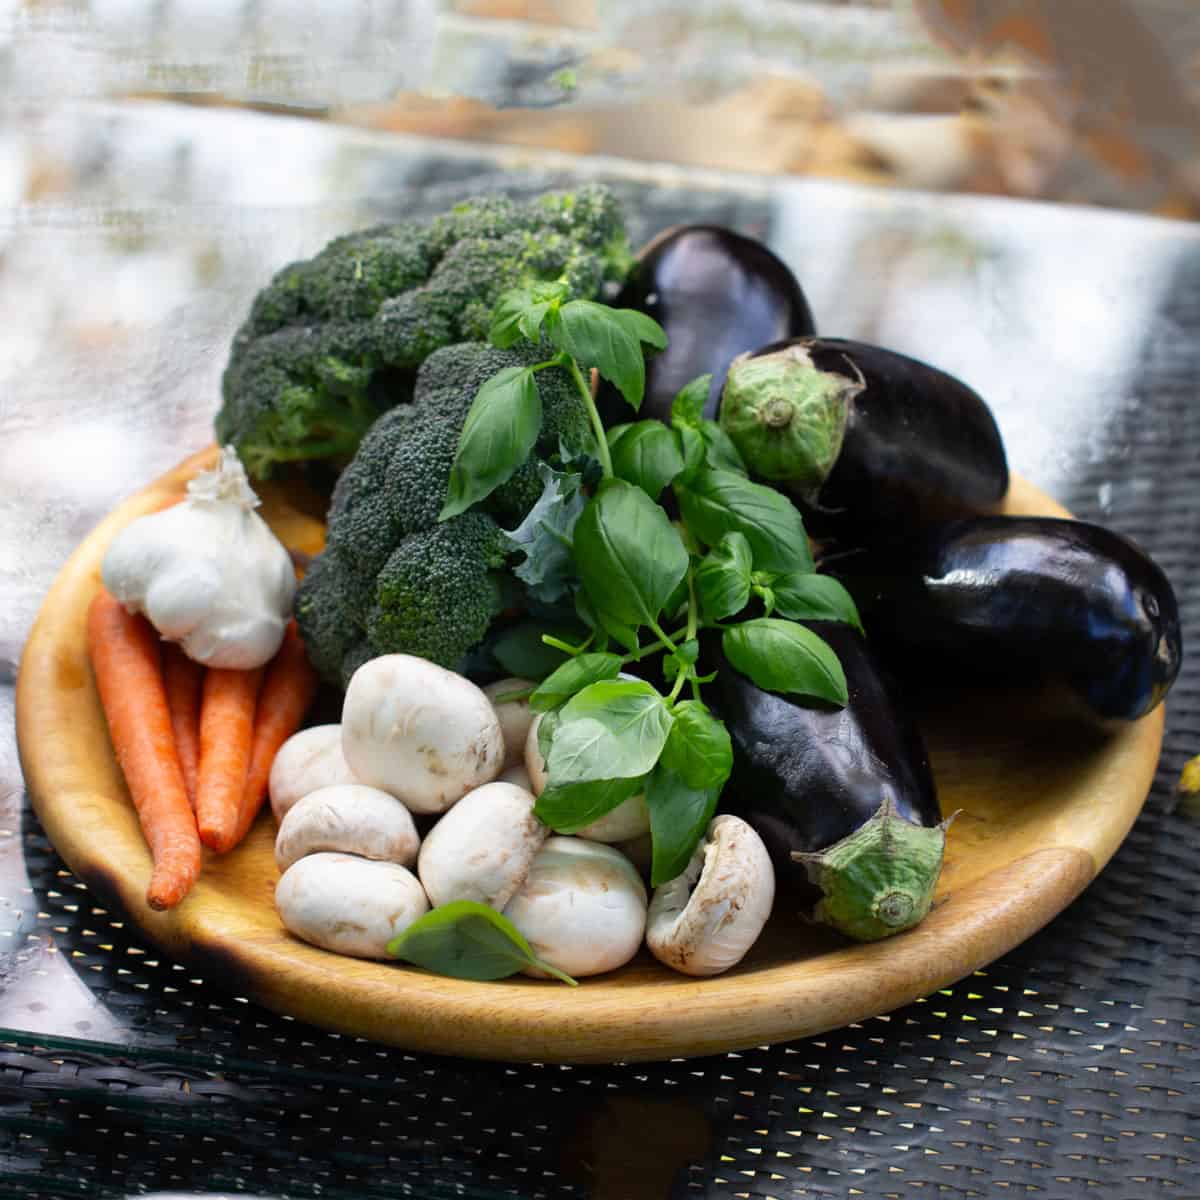 round wooden platter topped with 4 italian eggplants, a few carrots, a dozen white mushrooms, a head of broccoli a bulb of garlic and a few sprigs of fresh basil.